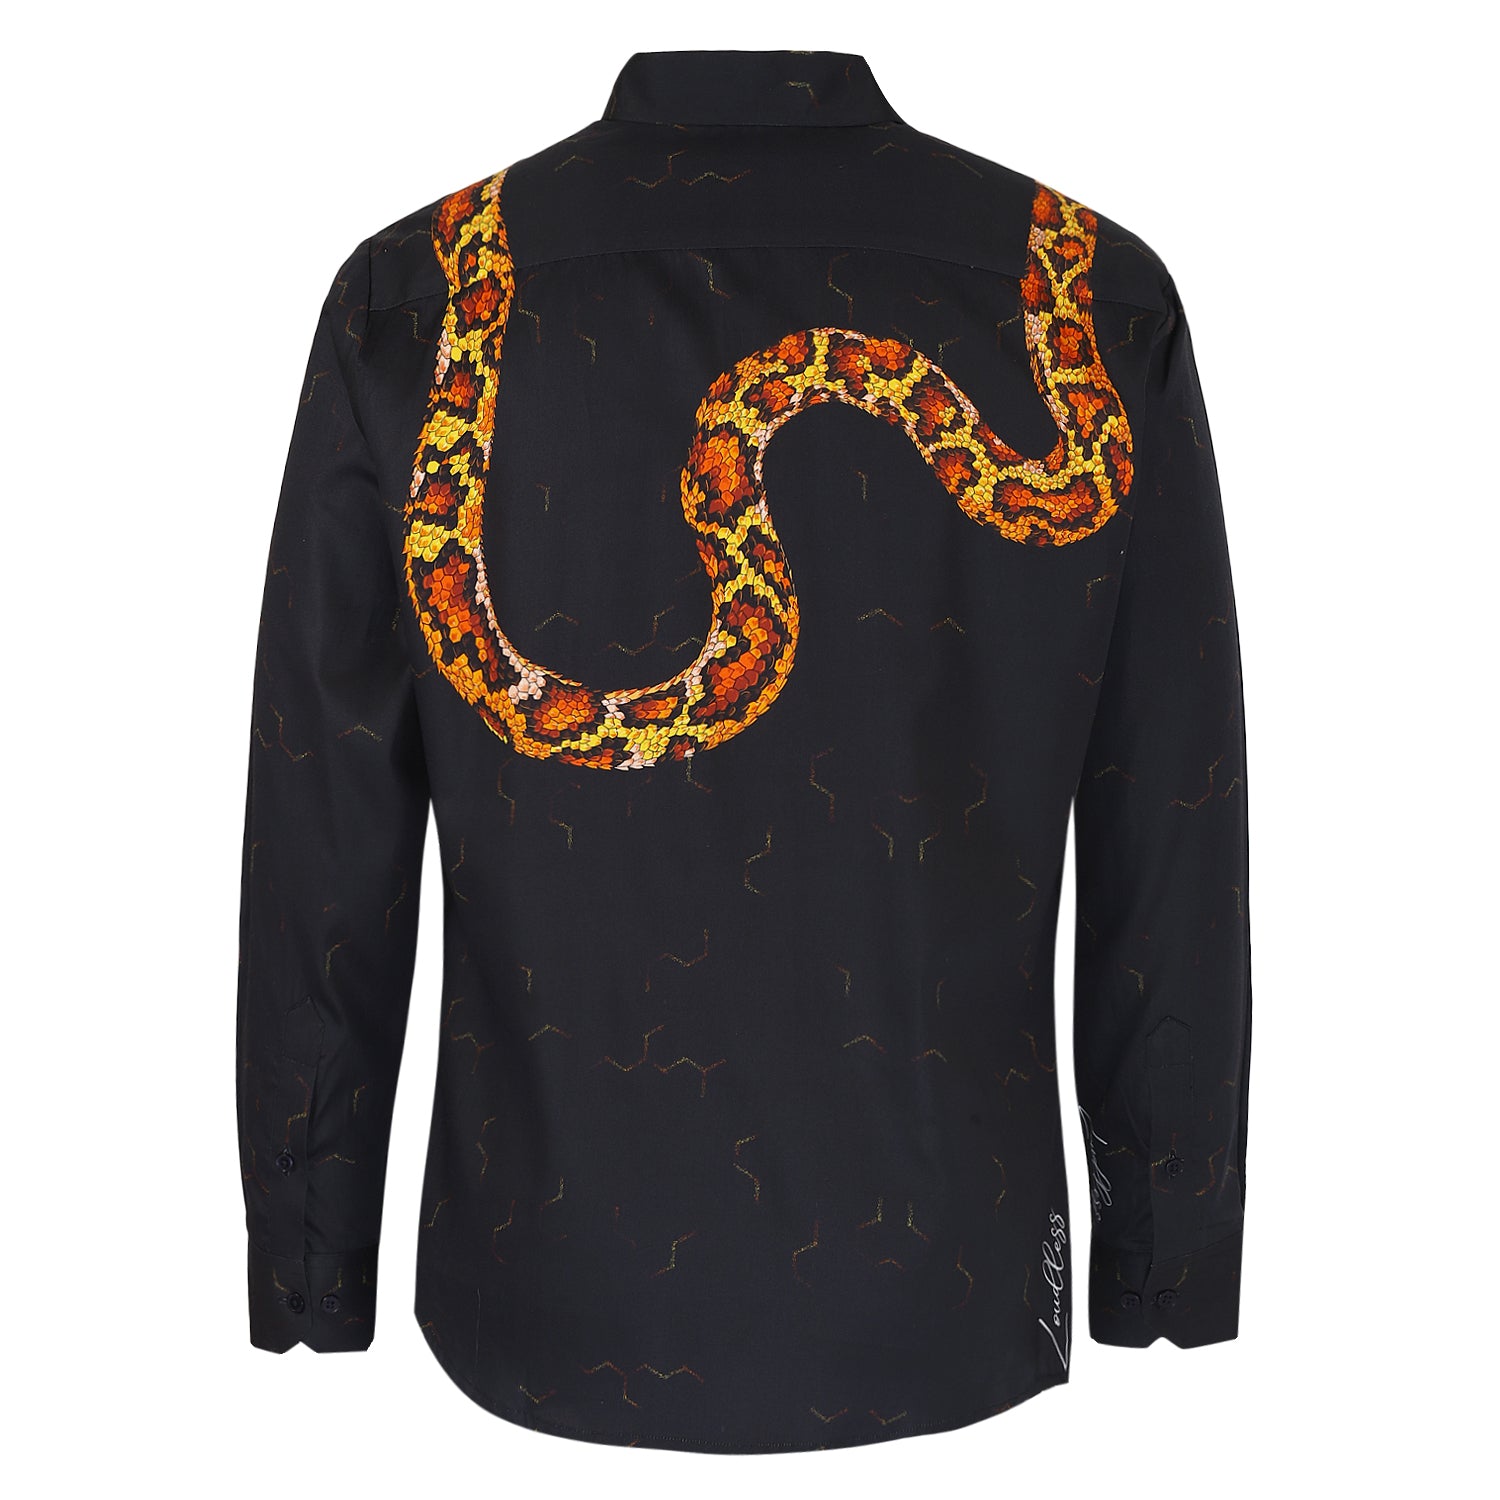 Men's luxury snake print shirt, perfect for a stylish and bold look at a club or a night out